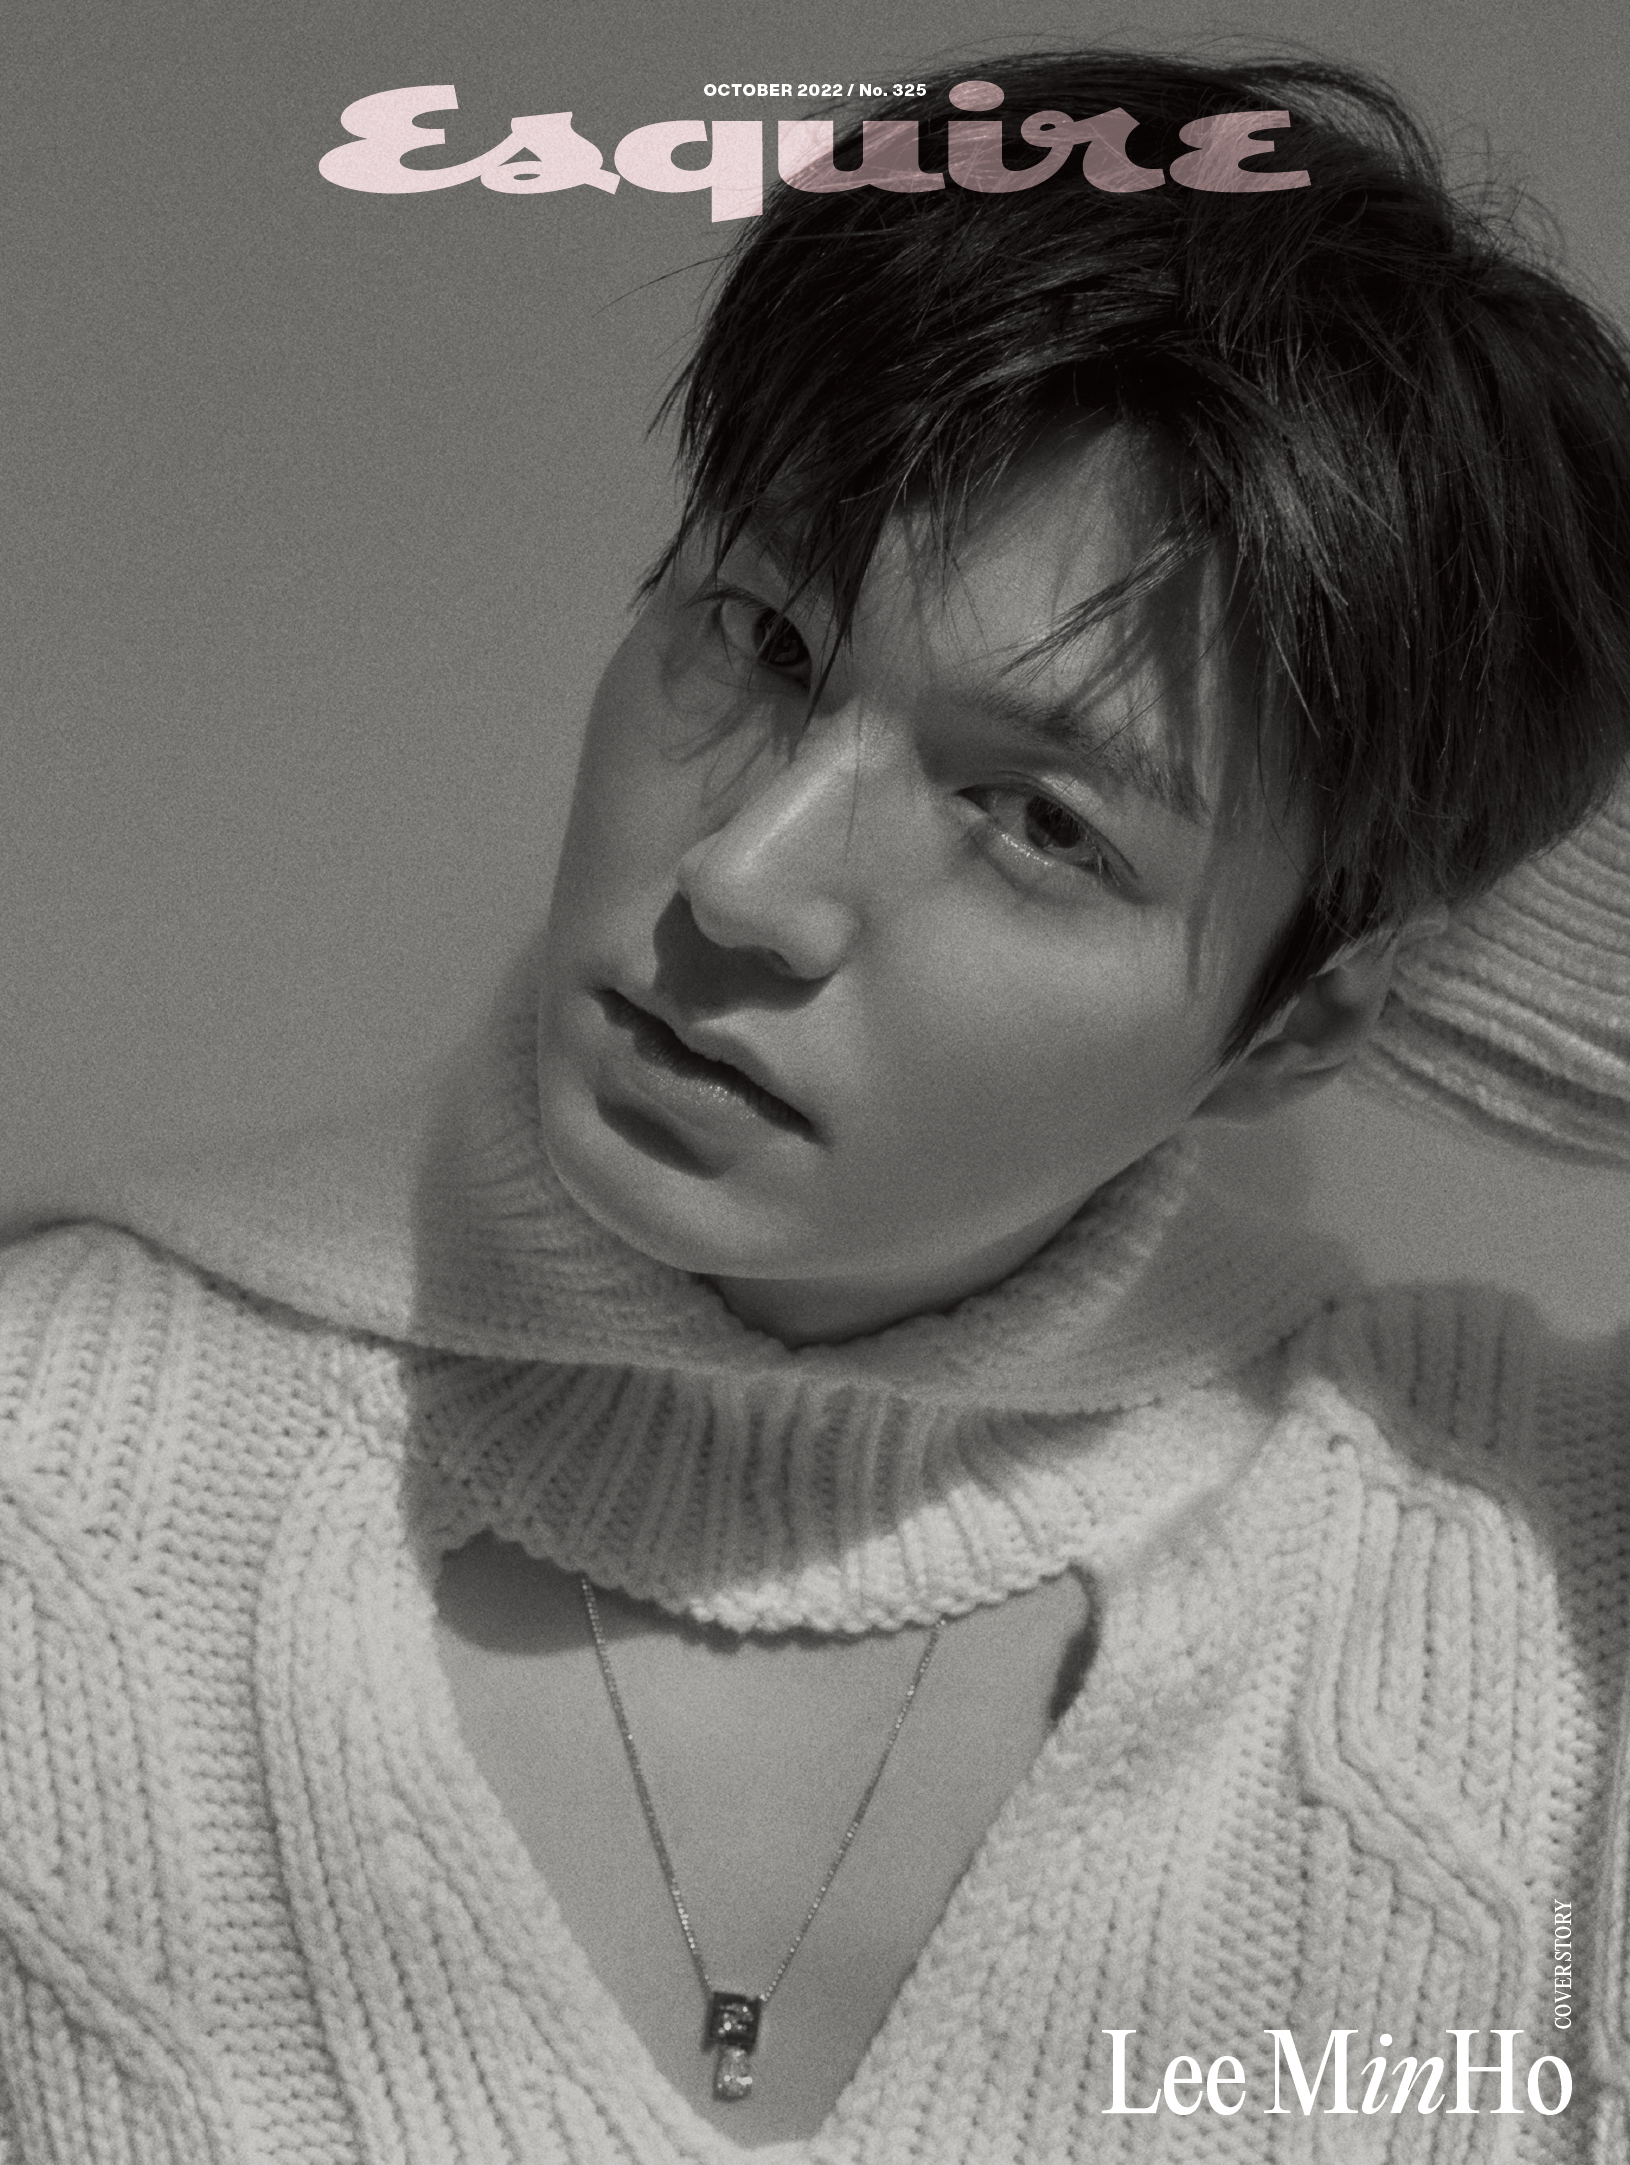 Lee Min Ho Stuns in Head to Toe Louis Vuitton for Esquire Korea + Reveals  More About his  Channel Lee Min Ho Film